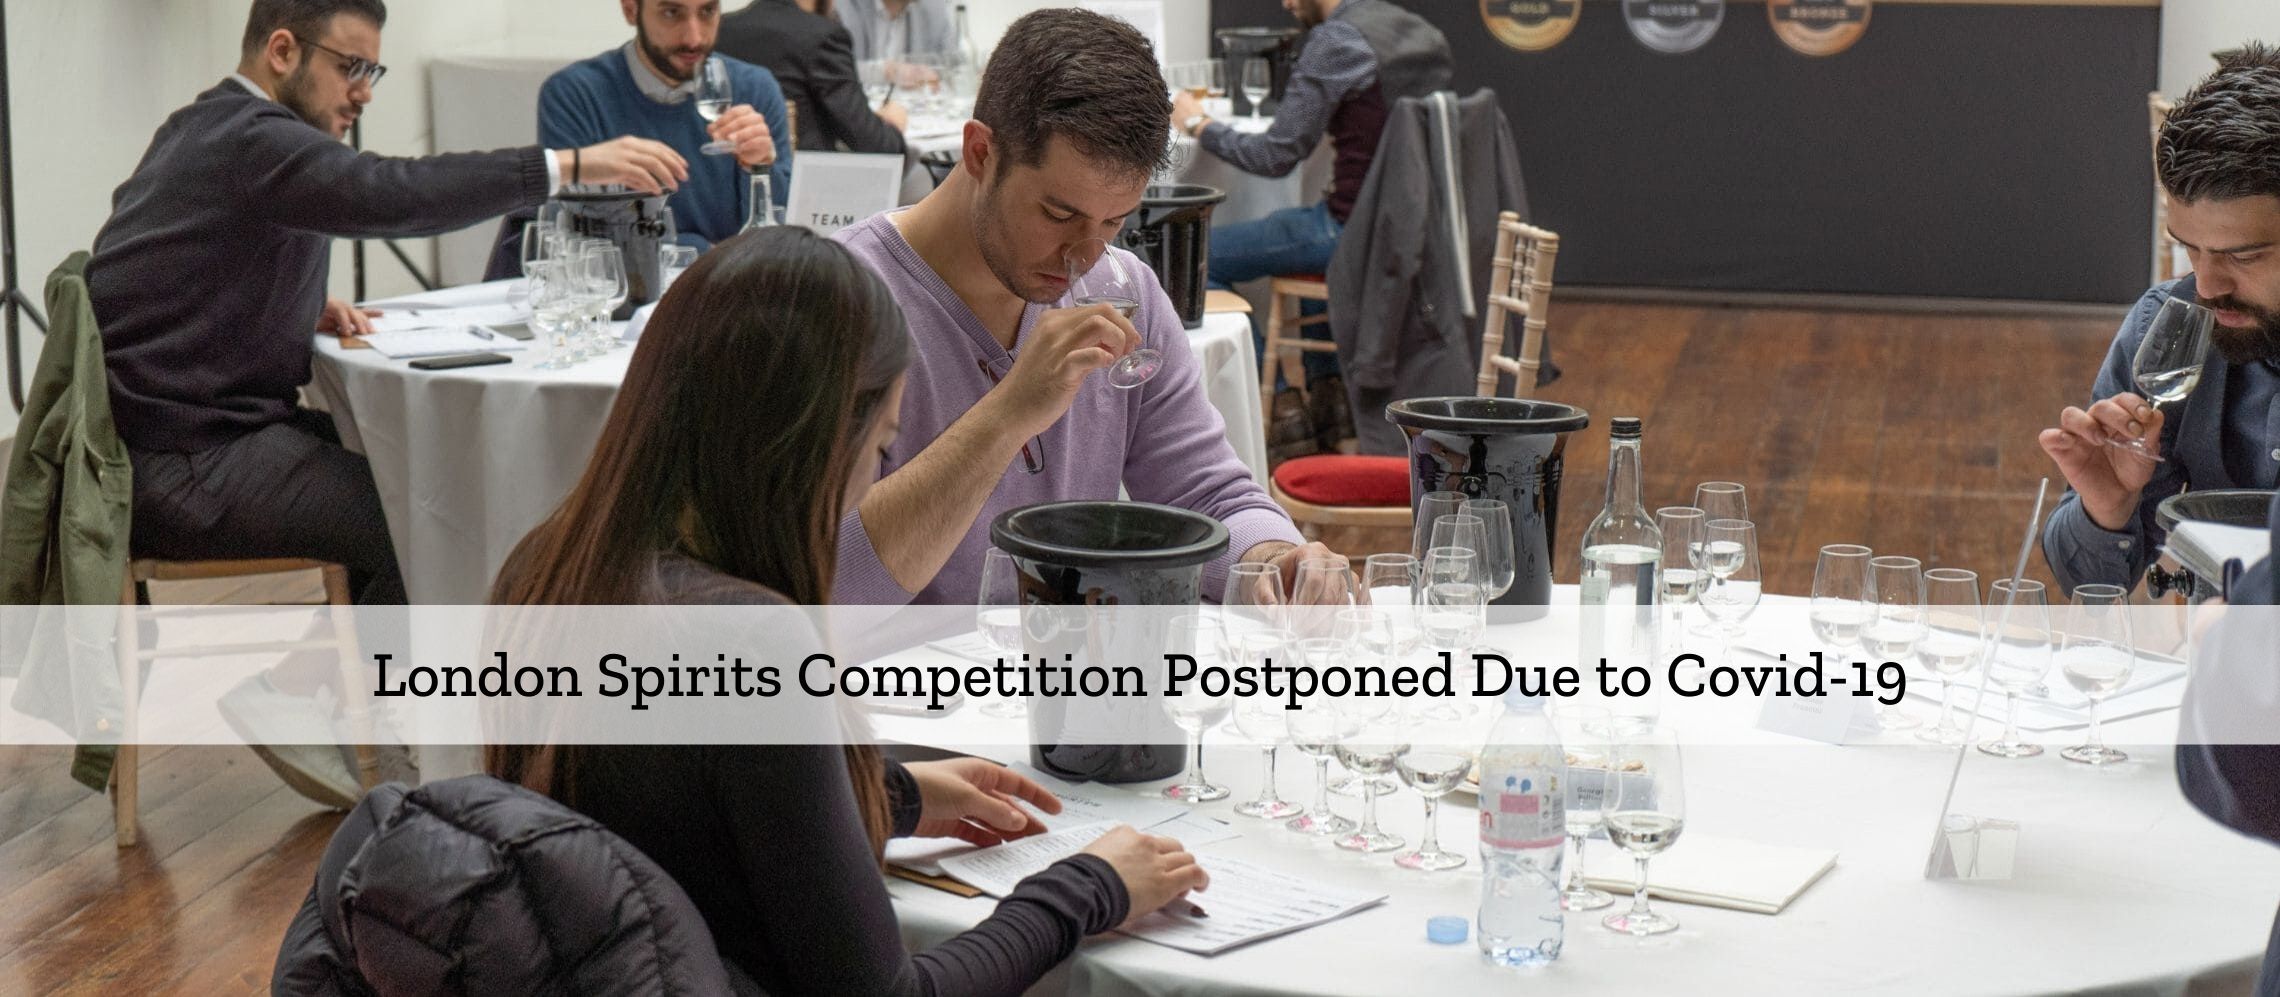 Photo for: London Spirits Competition Postponed Over Covid-19